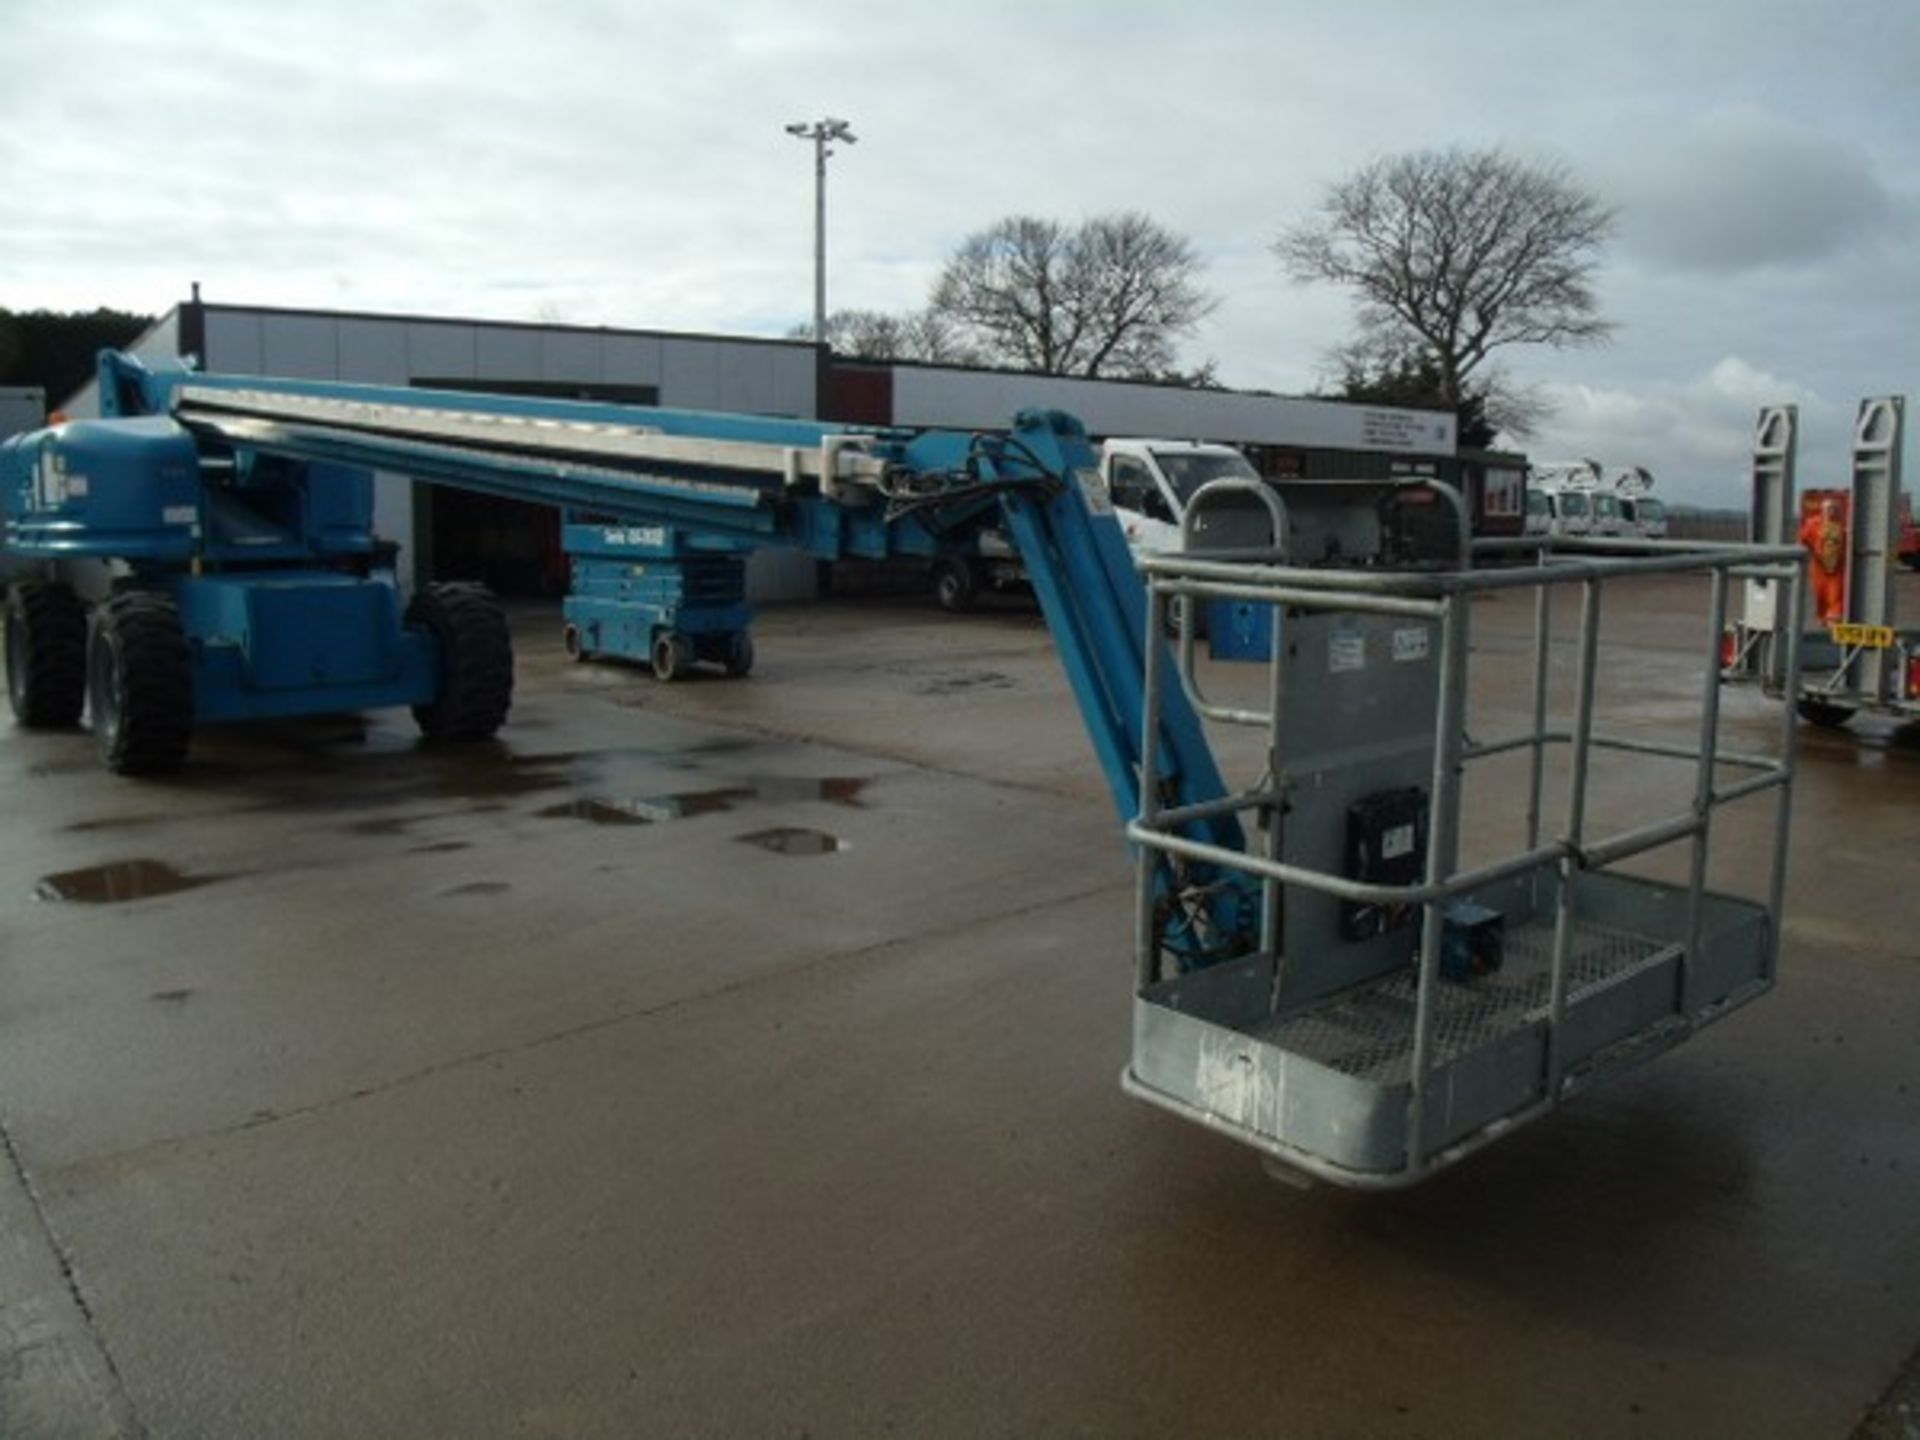 1999 GENIE 4X4 S85, s/n -1256, 5795hrs (verified), new alternator fitted 4 months ago, solid tyres. - Image 3 of 11